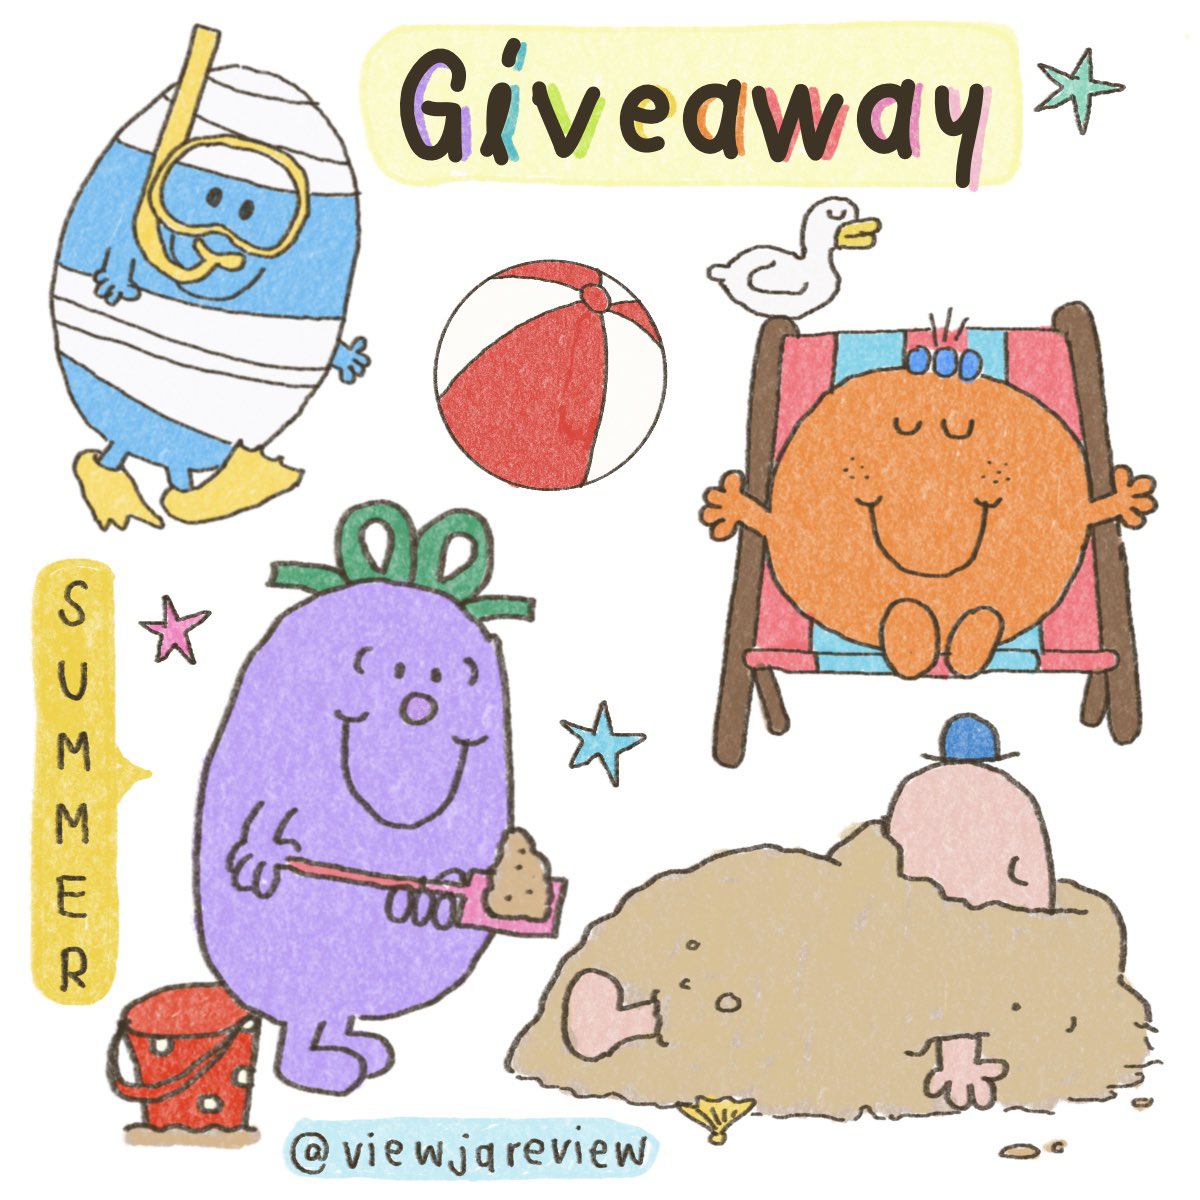 ✳︎ 𝘱𝘭𝘴 𝘳𝘵 / 𝘧𝘢𝘷 🏄🏻‍♀️⌇ 

giveaway 🛼𓇼🍧 summer.png 

( personal use only / don’t repost )❕

 🚌ミ🏖 link in mention ⟡

 #แจกไฟล์png #แจกpng #Goodnotes #แจกอิโมจิ